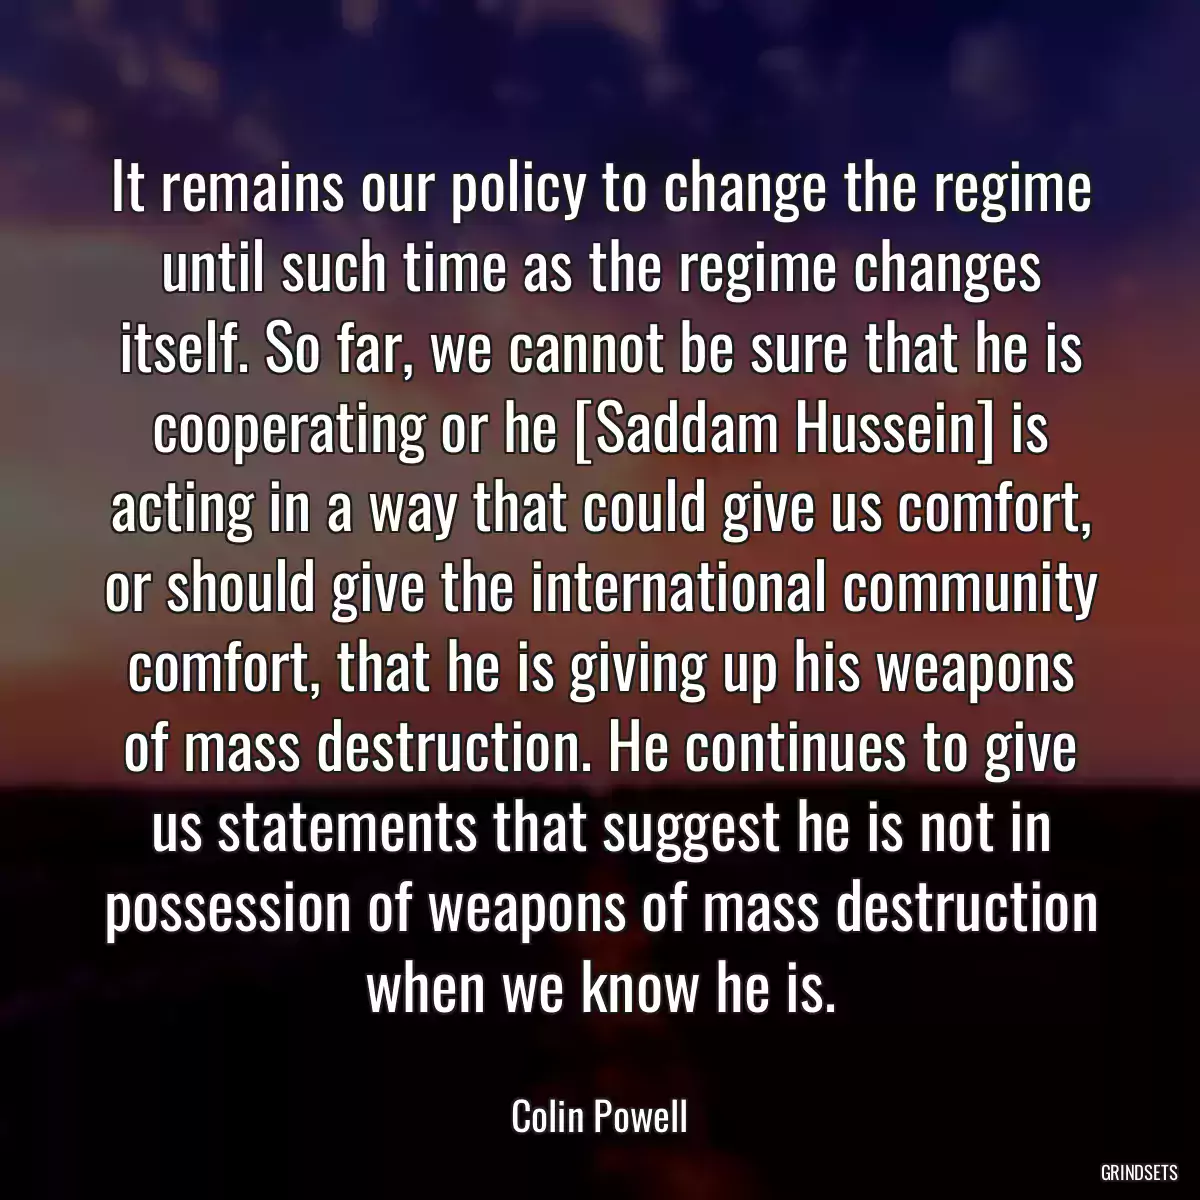 It remains our policy to change the regime until such time as the regime changes itself. So far, we cannot be sure that he is cooperating or he [Saddam Hussein] is acting in a way that could give us comfort, or should give the international community comfort, that he is giving up his weapons of mass destruction. He continues to give us statements that suggest he is not in possession of weapons of mass destruction when we know he is.